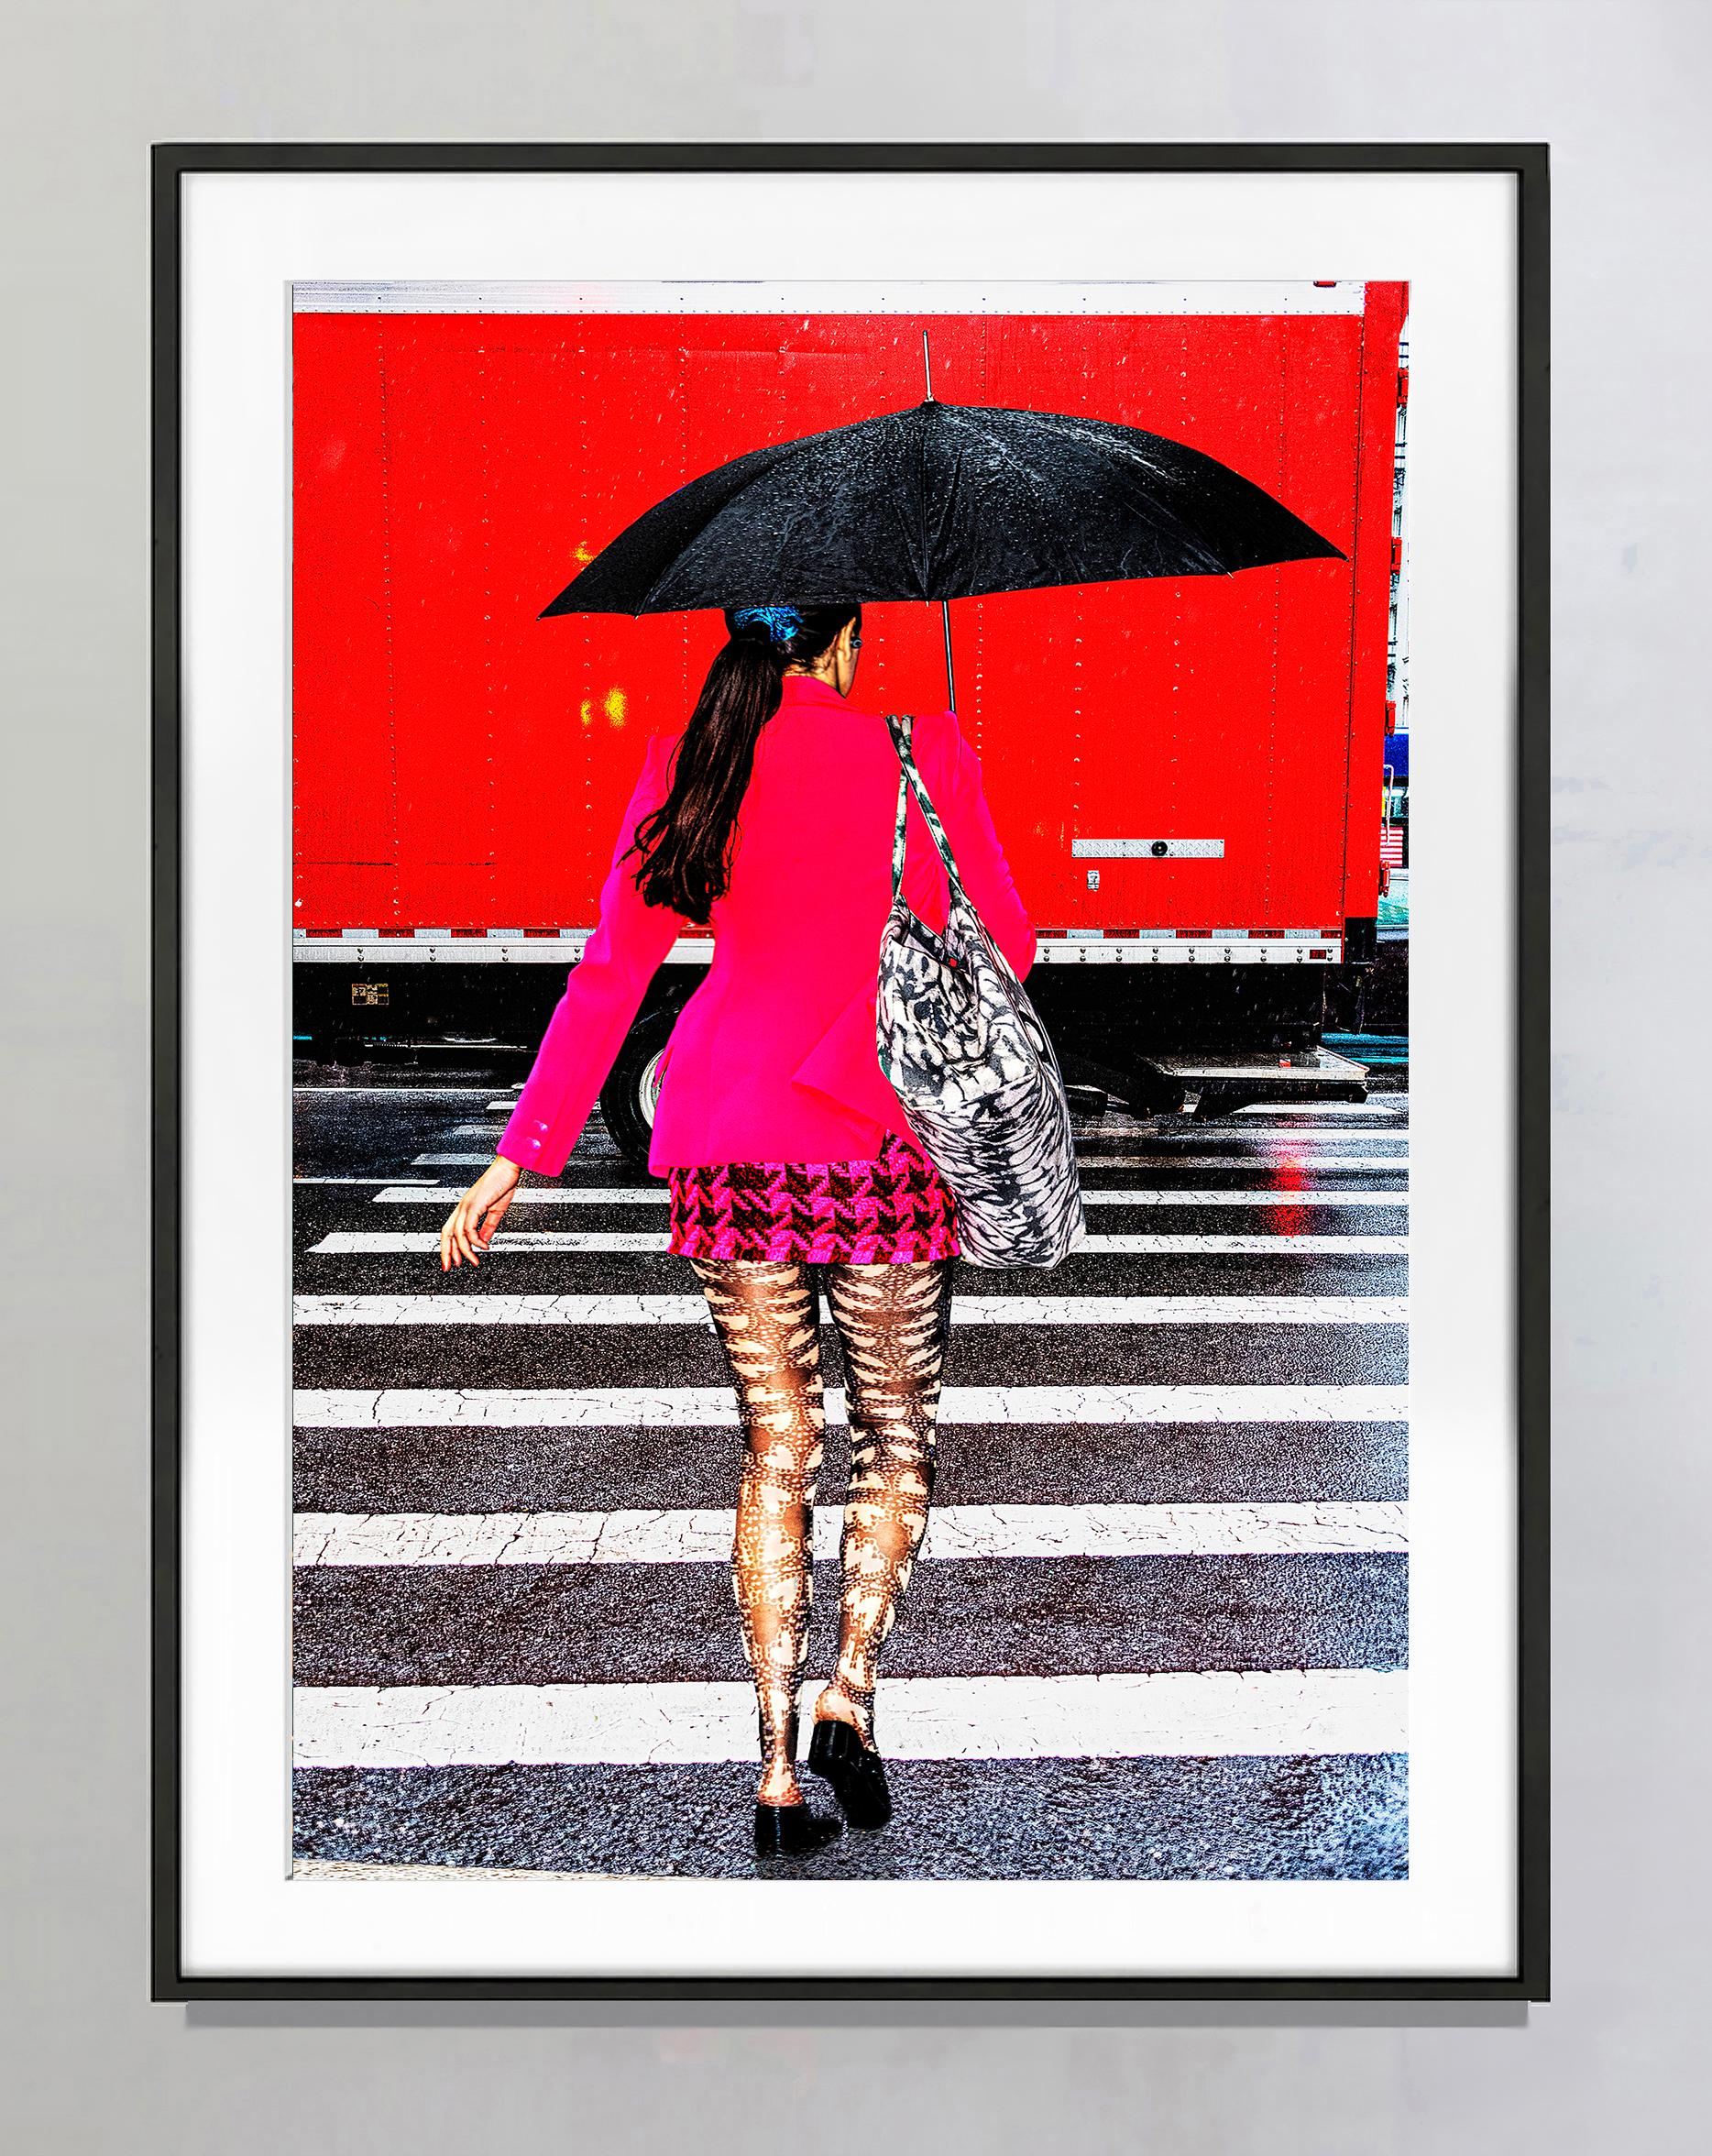 Street Fashionista in Pink Ensemble on New York City Rainy Day  - Photograph by Mitchell Funk